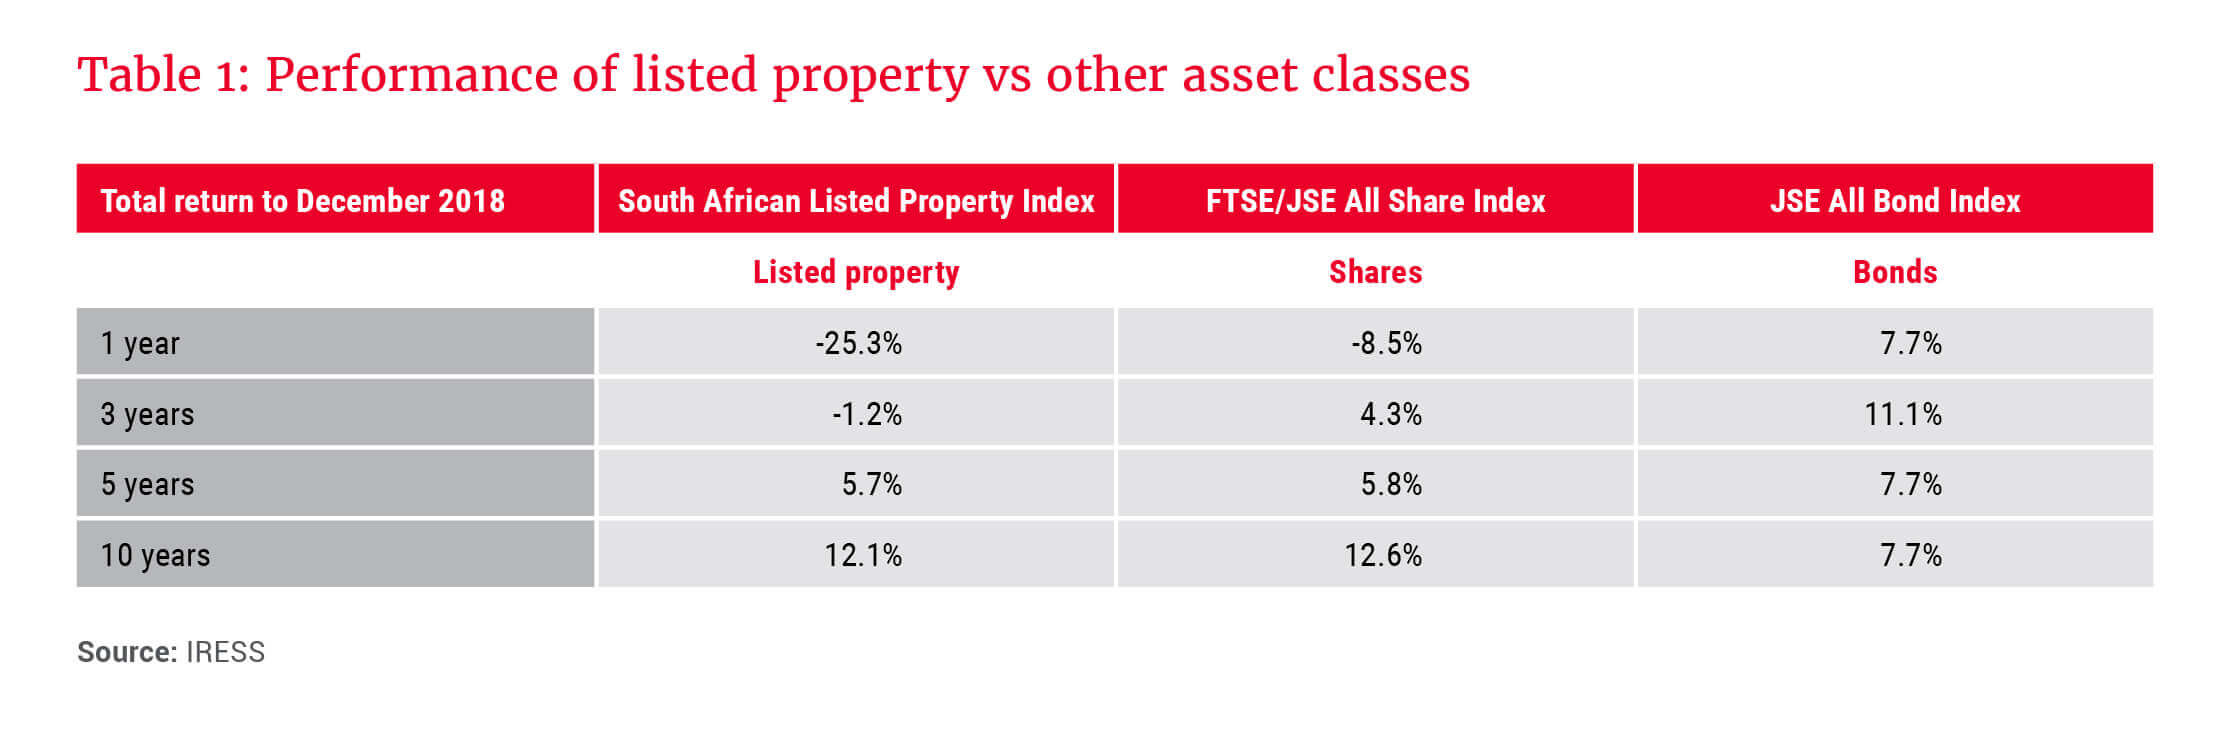 Performance of listed property vs other asset classes - Allan Gray 